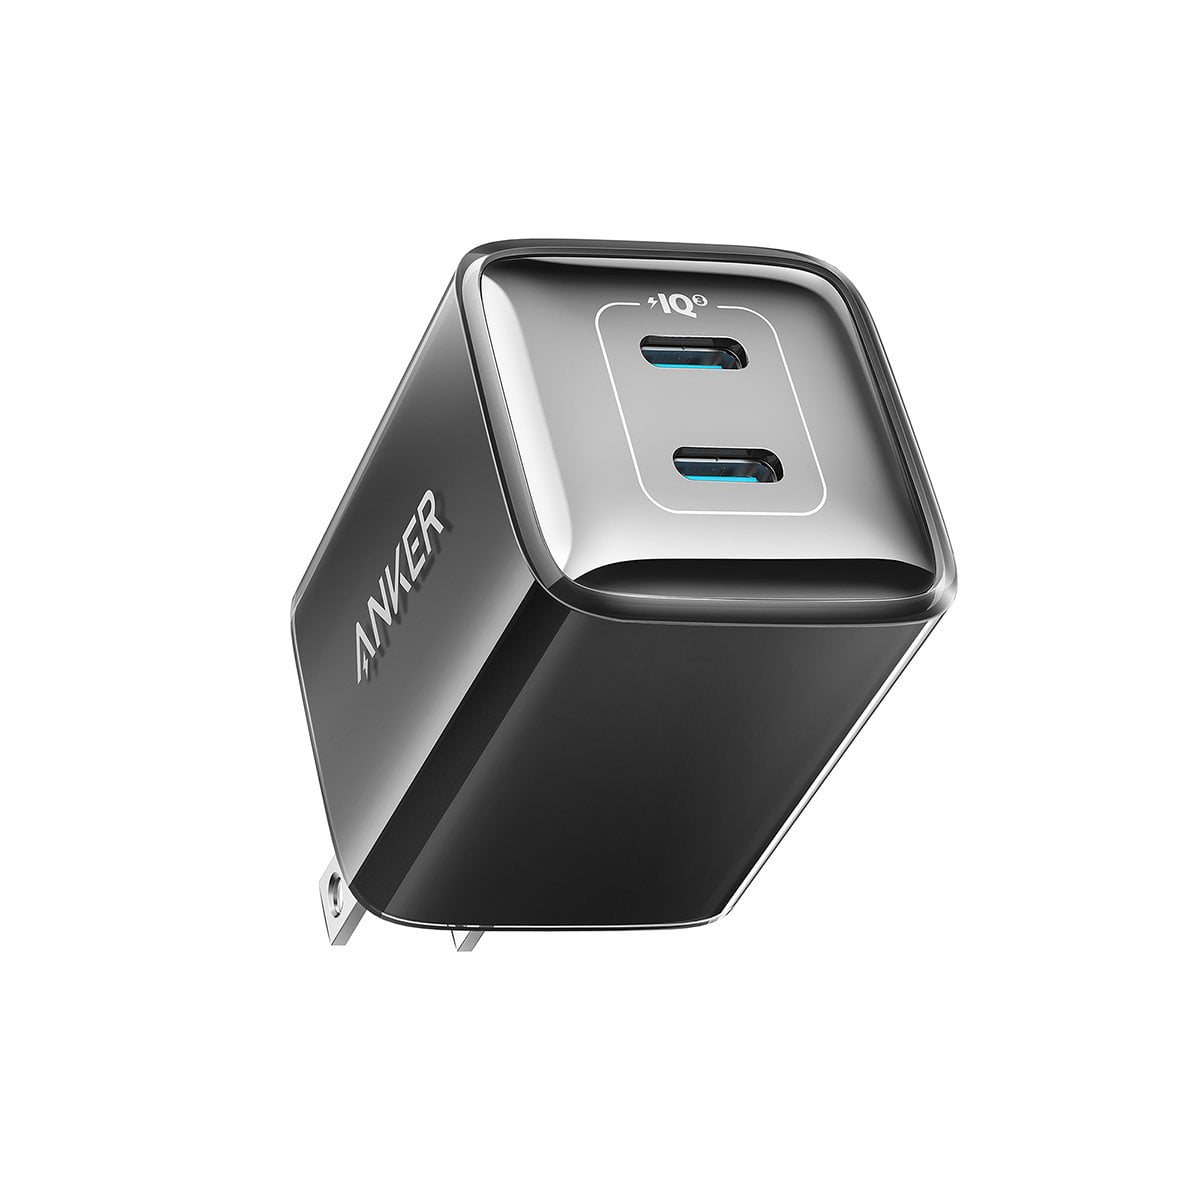 PowerPort III Charger for iPhone 13/13 Mini/13 Pro/13 Pro Max/12/11 Anker 20W PIQ 3.0 Fast Charger with Foldable Plug and More iPad/iPad Mini MagSafe Cable Not Included USB C Charger